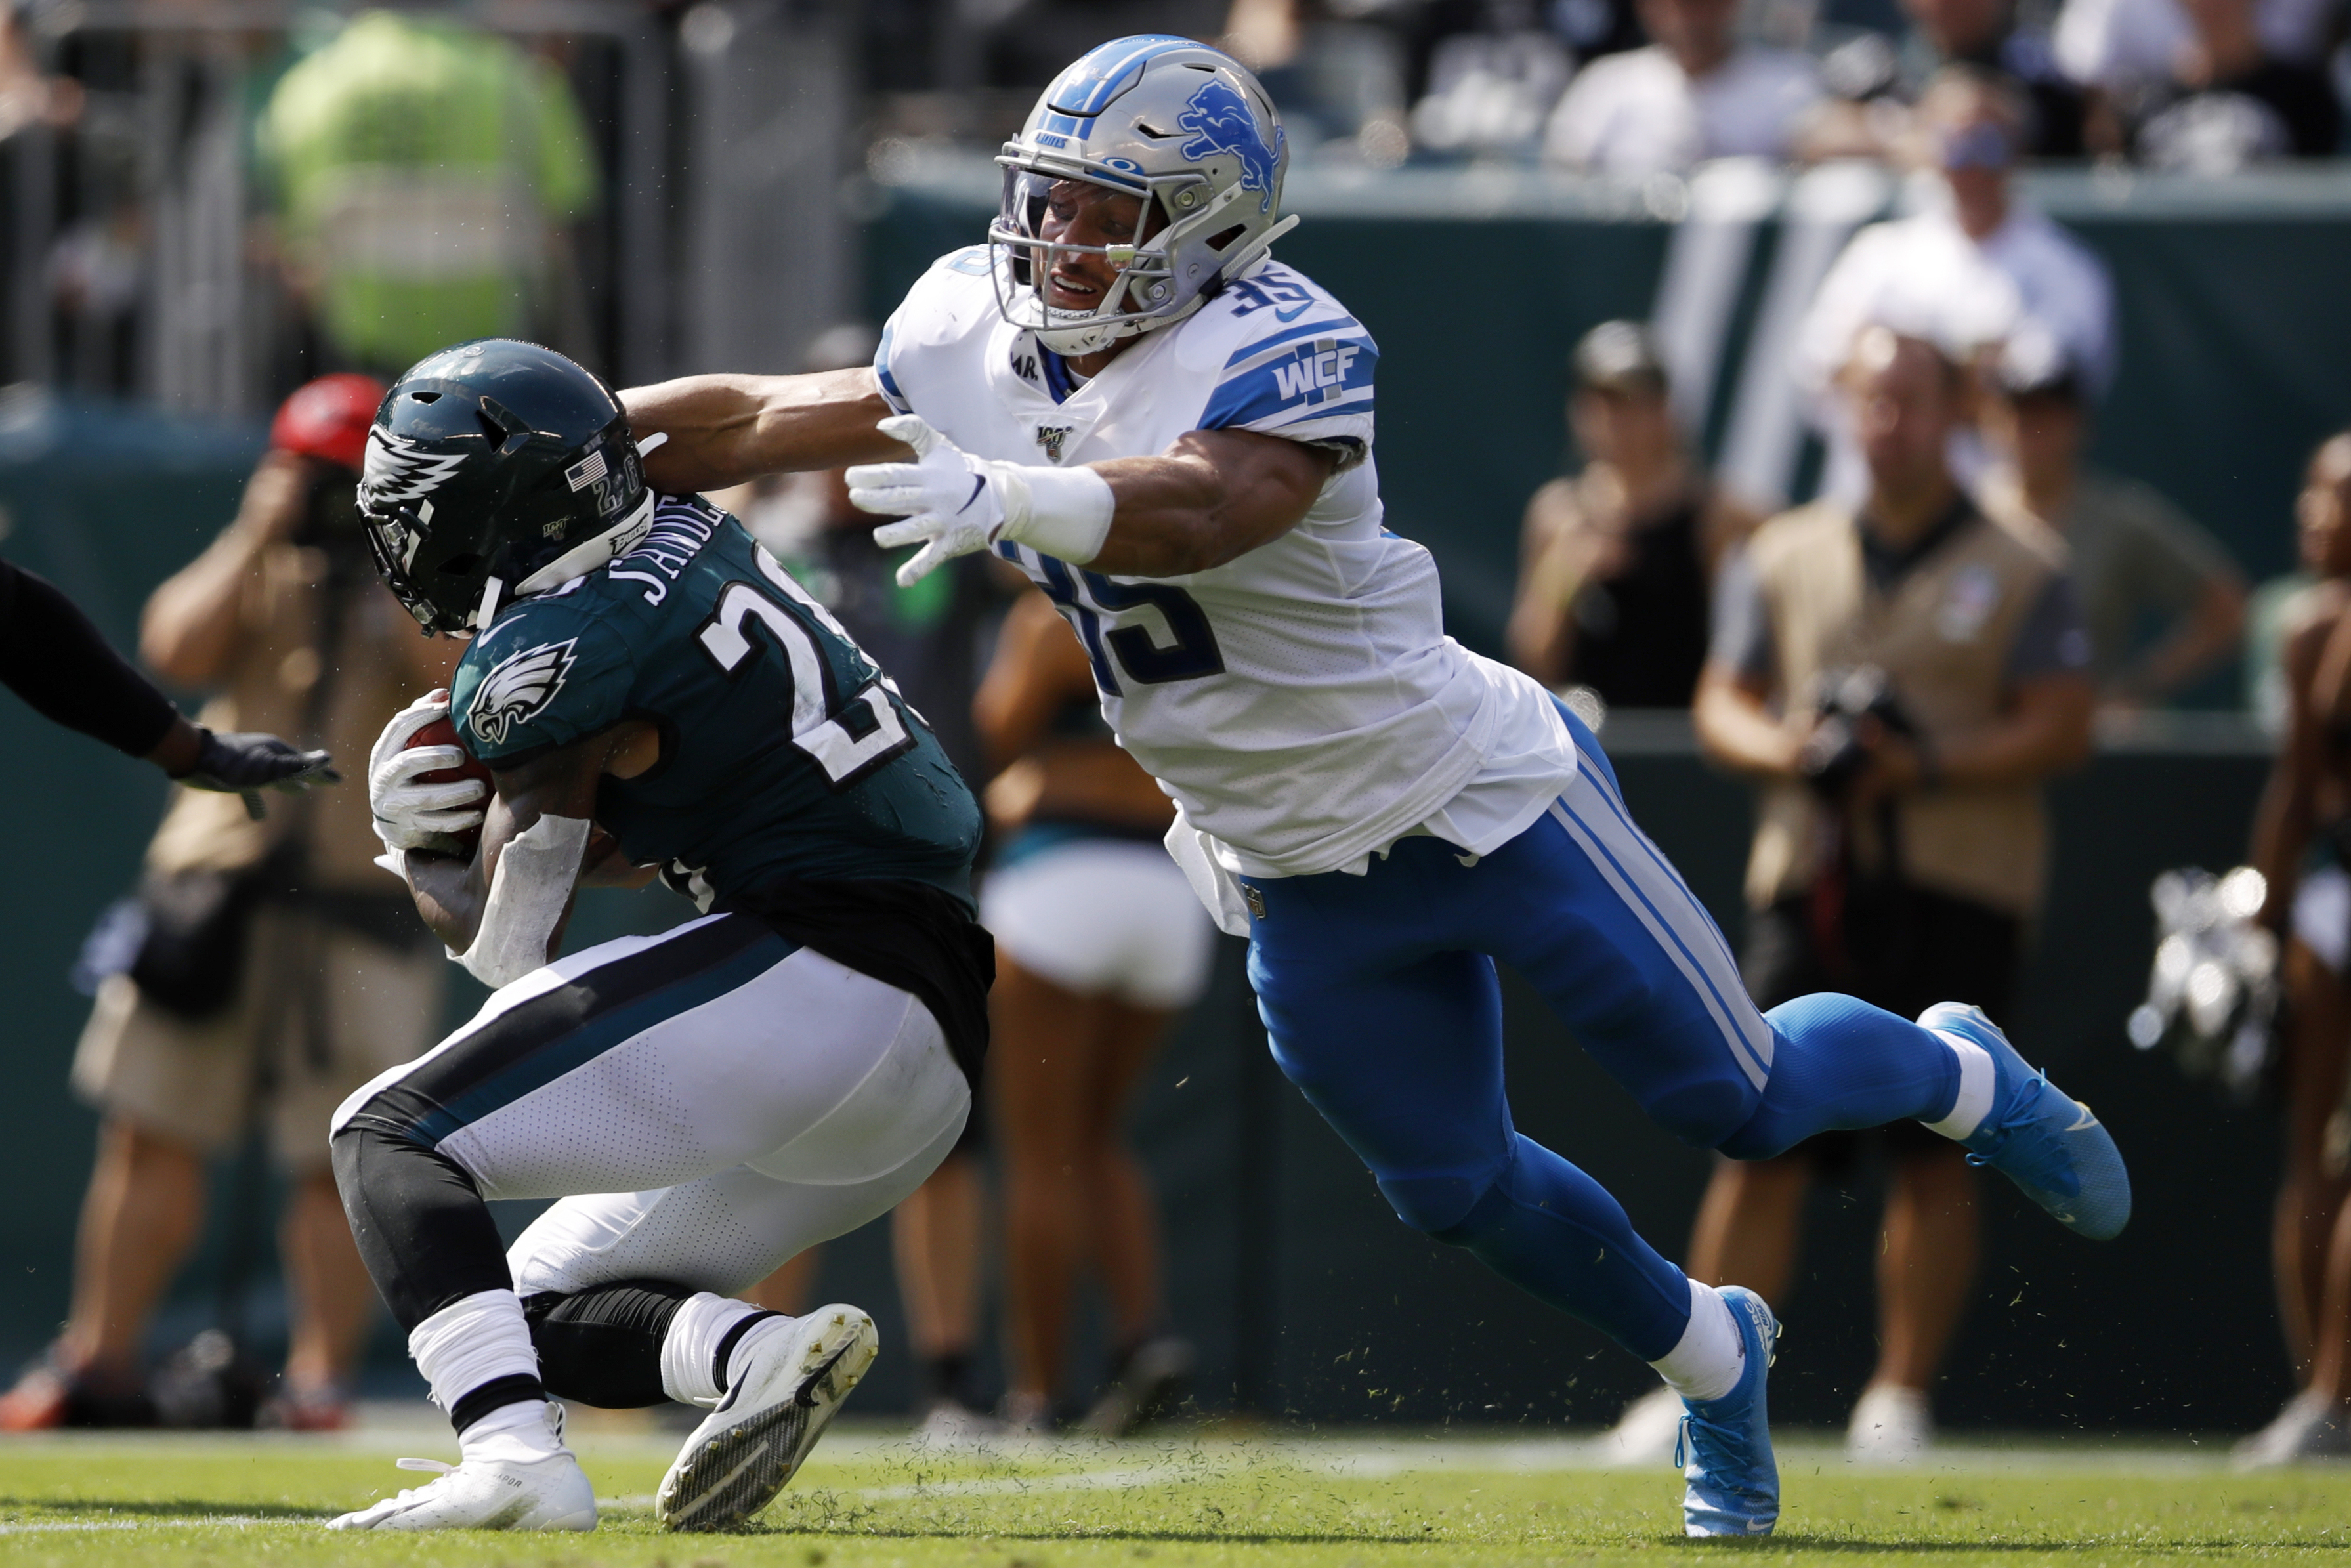 Stafford, Agnew lead Lions over Eagles 27-24